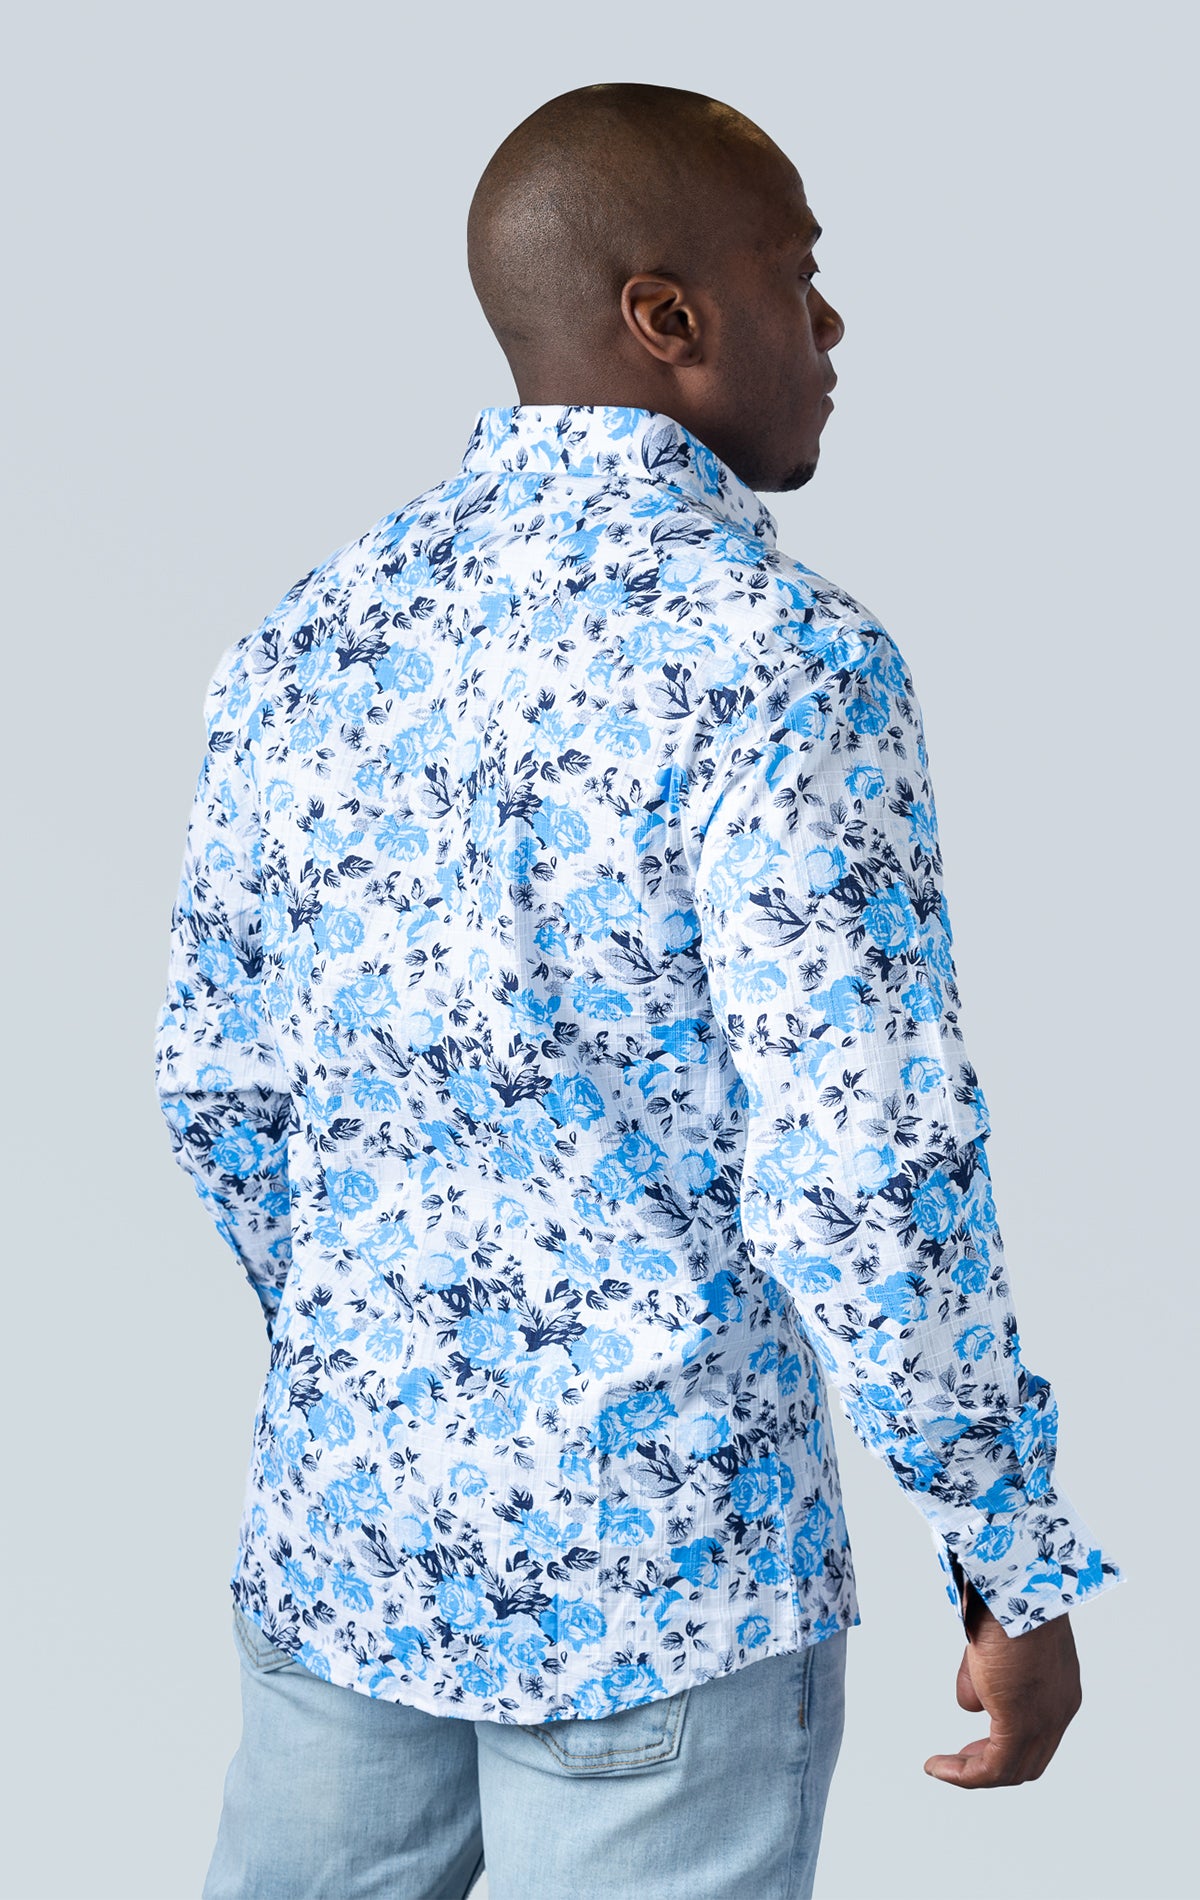 White long sleeve button up dress shirt with blue floral pattern